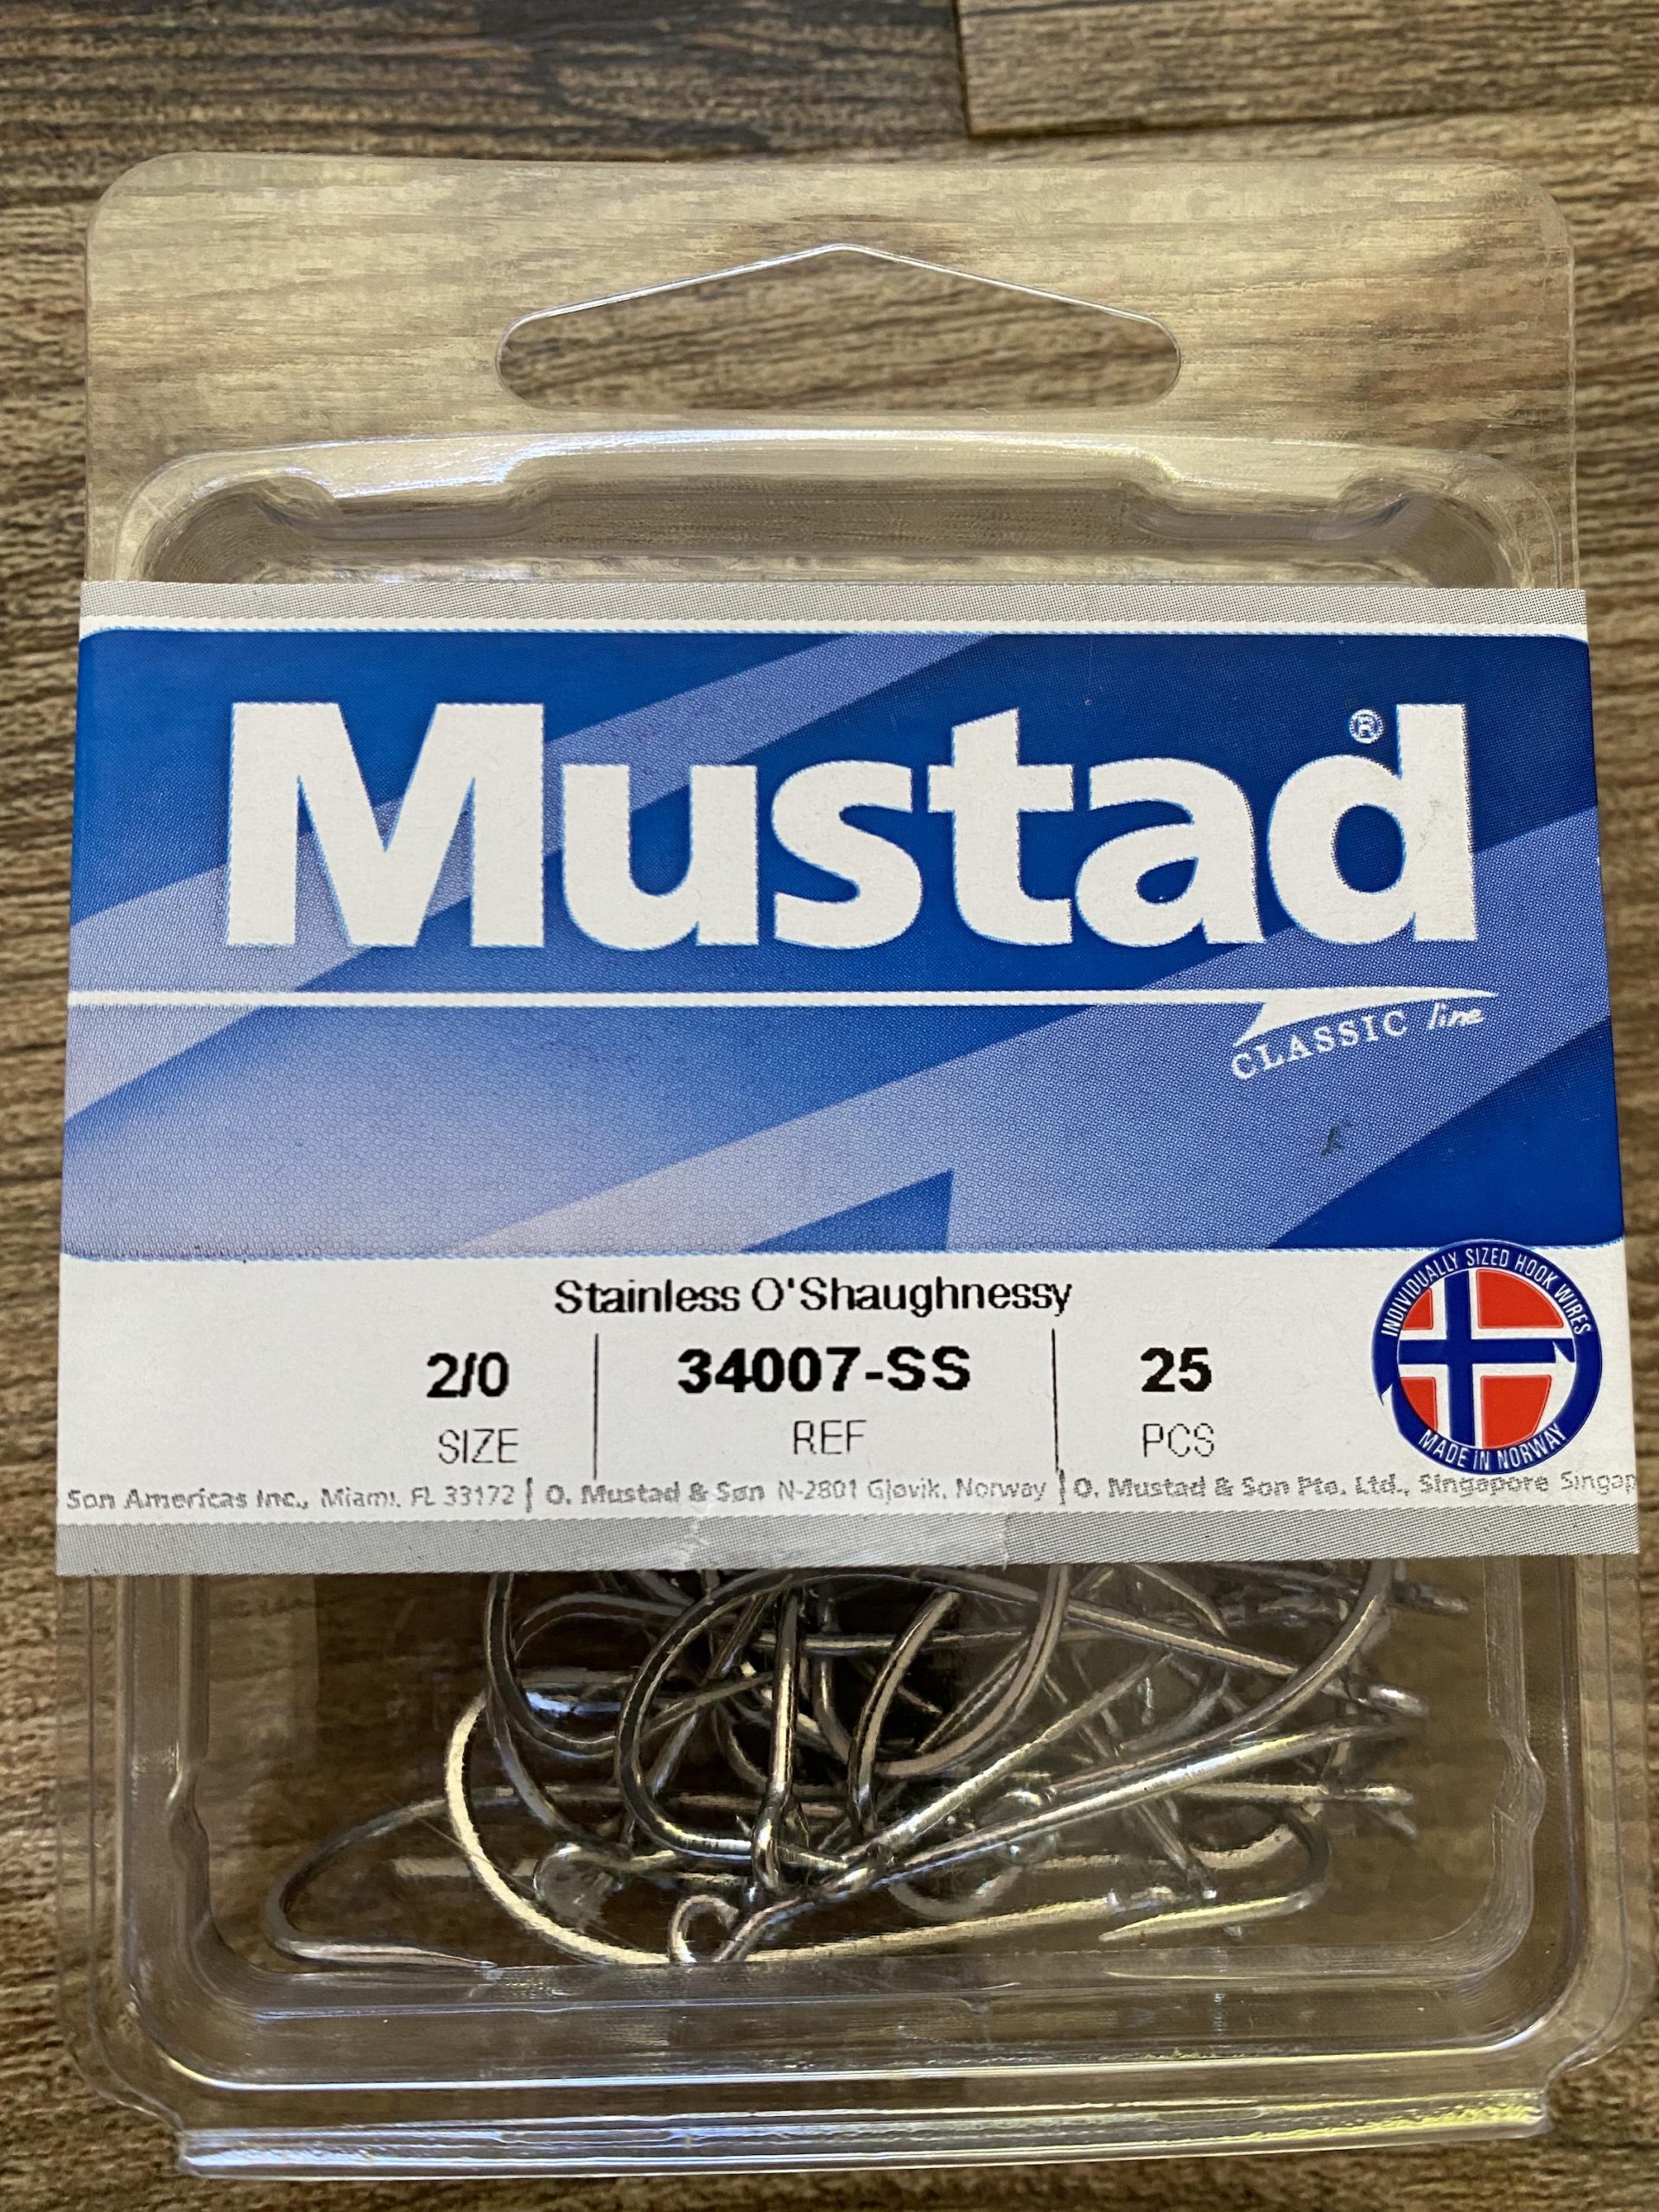 MUSTAD 34007 STAINLESS STEEL SUPERIOR HOOK 01 02 03 04 06 08 MADE